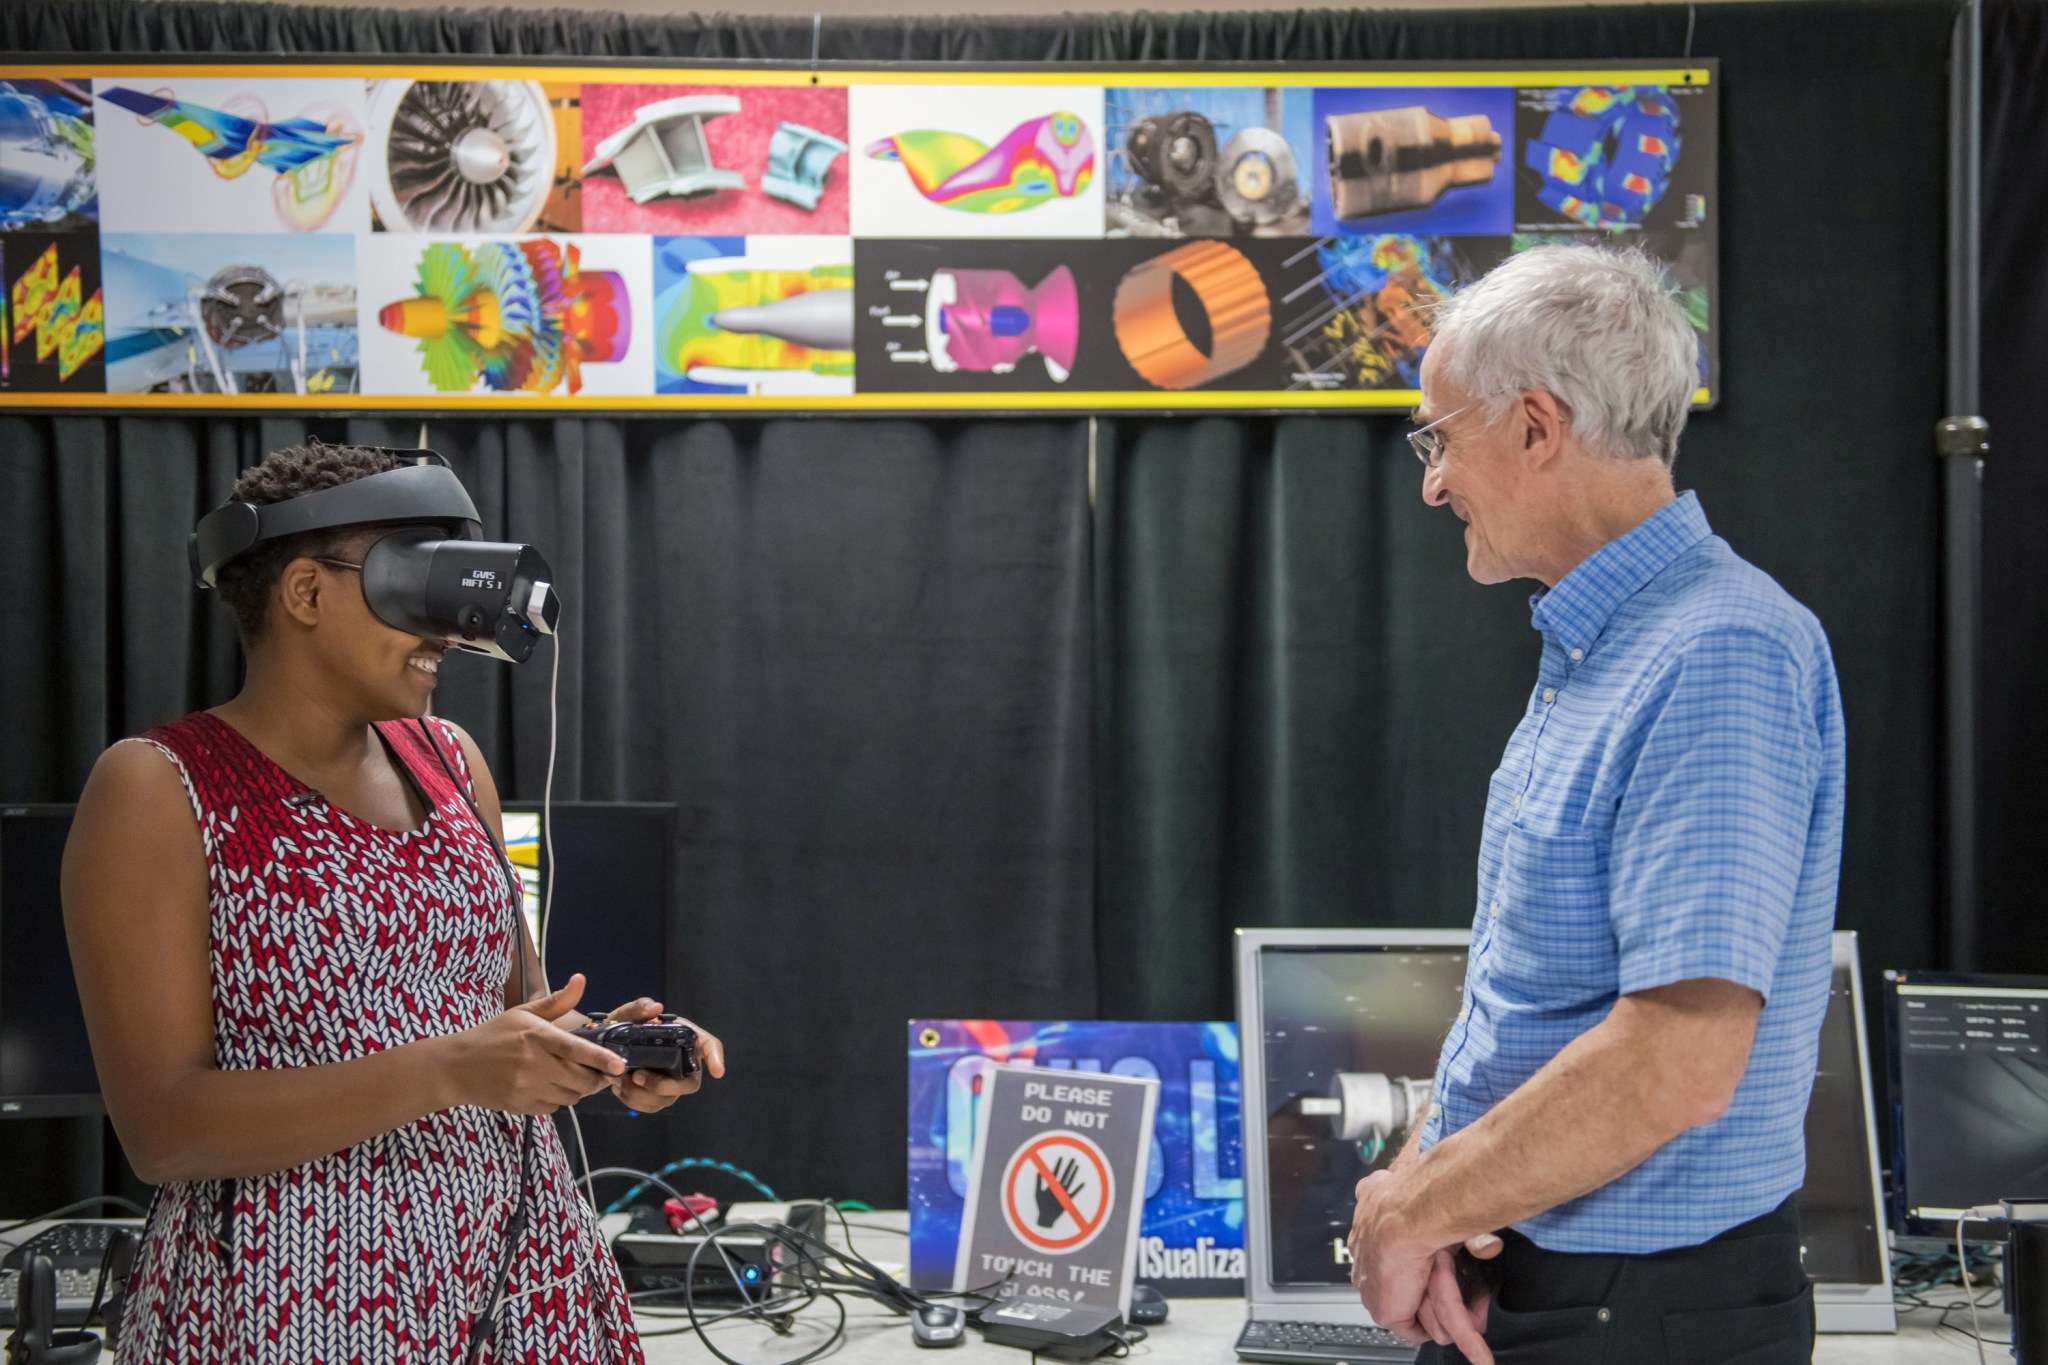 Nelly Cheboi enjoys a virtual reality demonstration. She smiles as she wears a VR headset and holds a remote controller. She is wearing a red and white dress. Herb Schilling, computer scientist, smiles as he watches her.